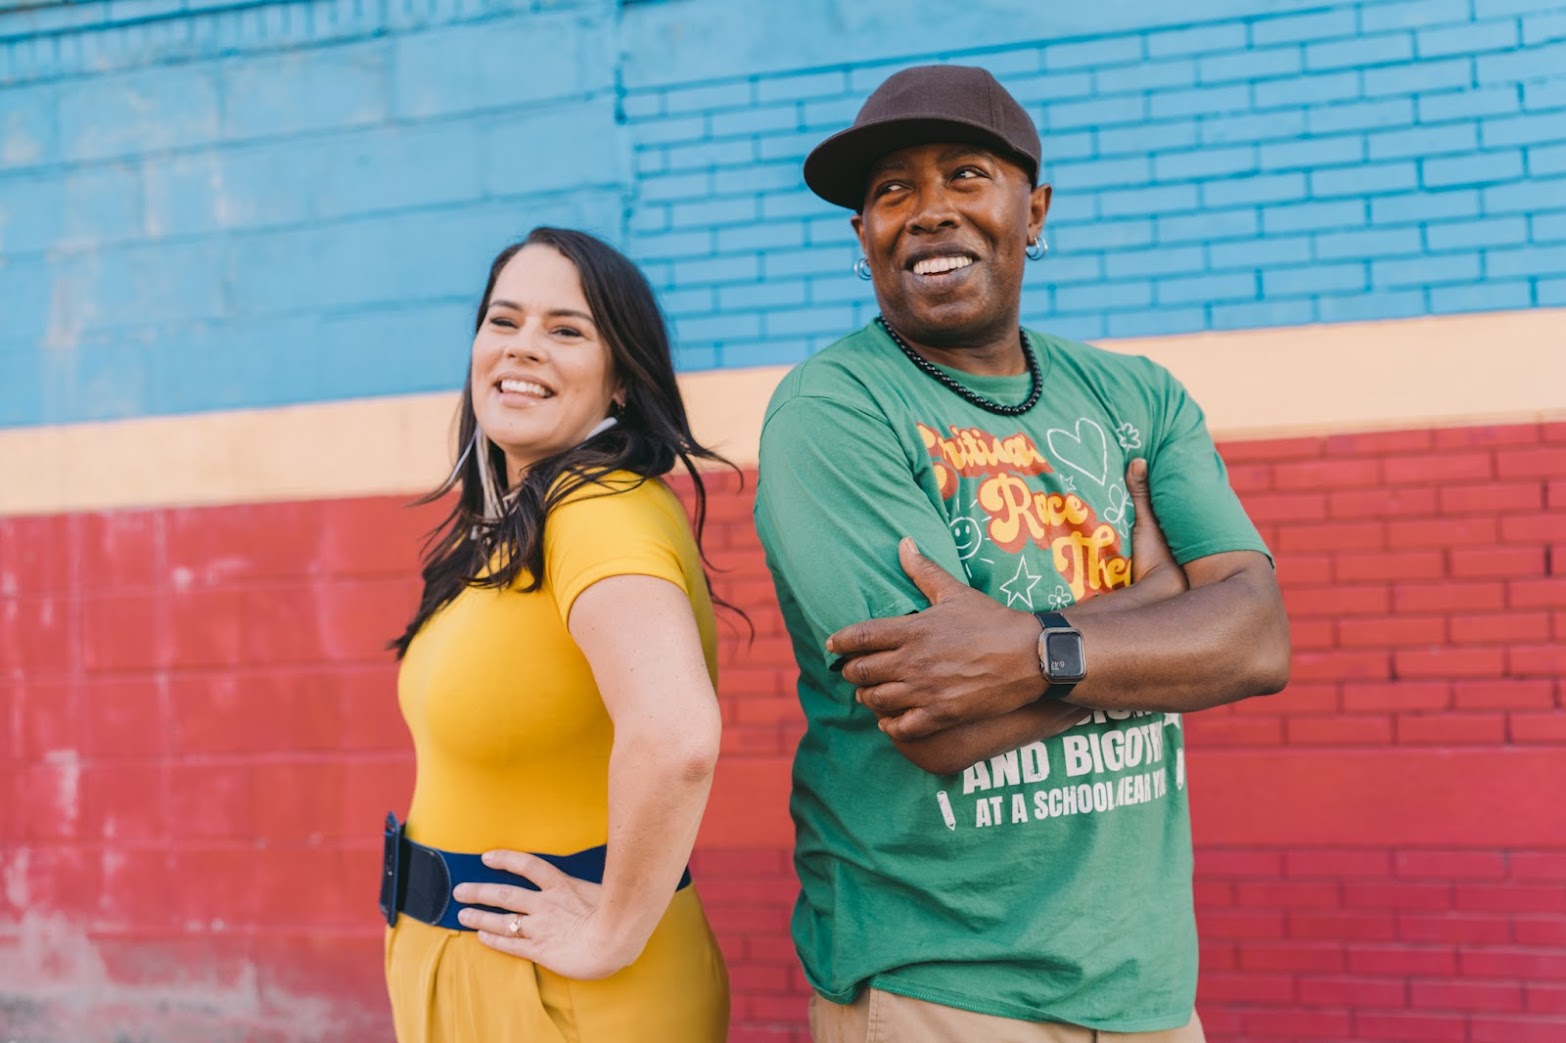 Woman in yellow and man in green against a red white a blue wall smiling